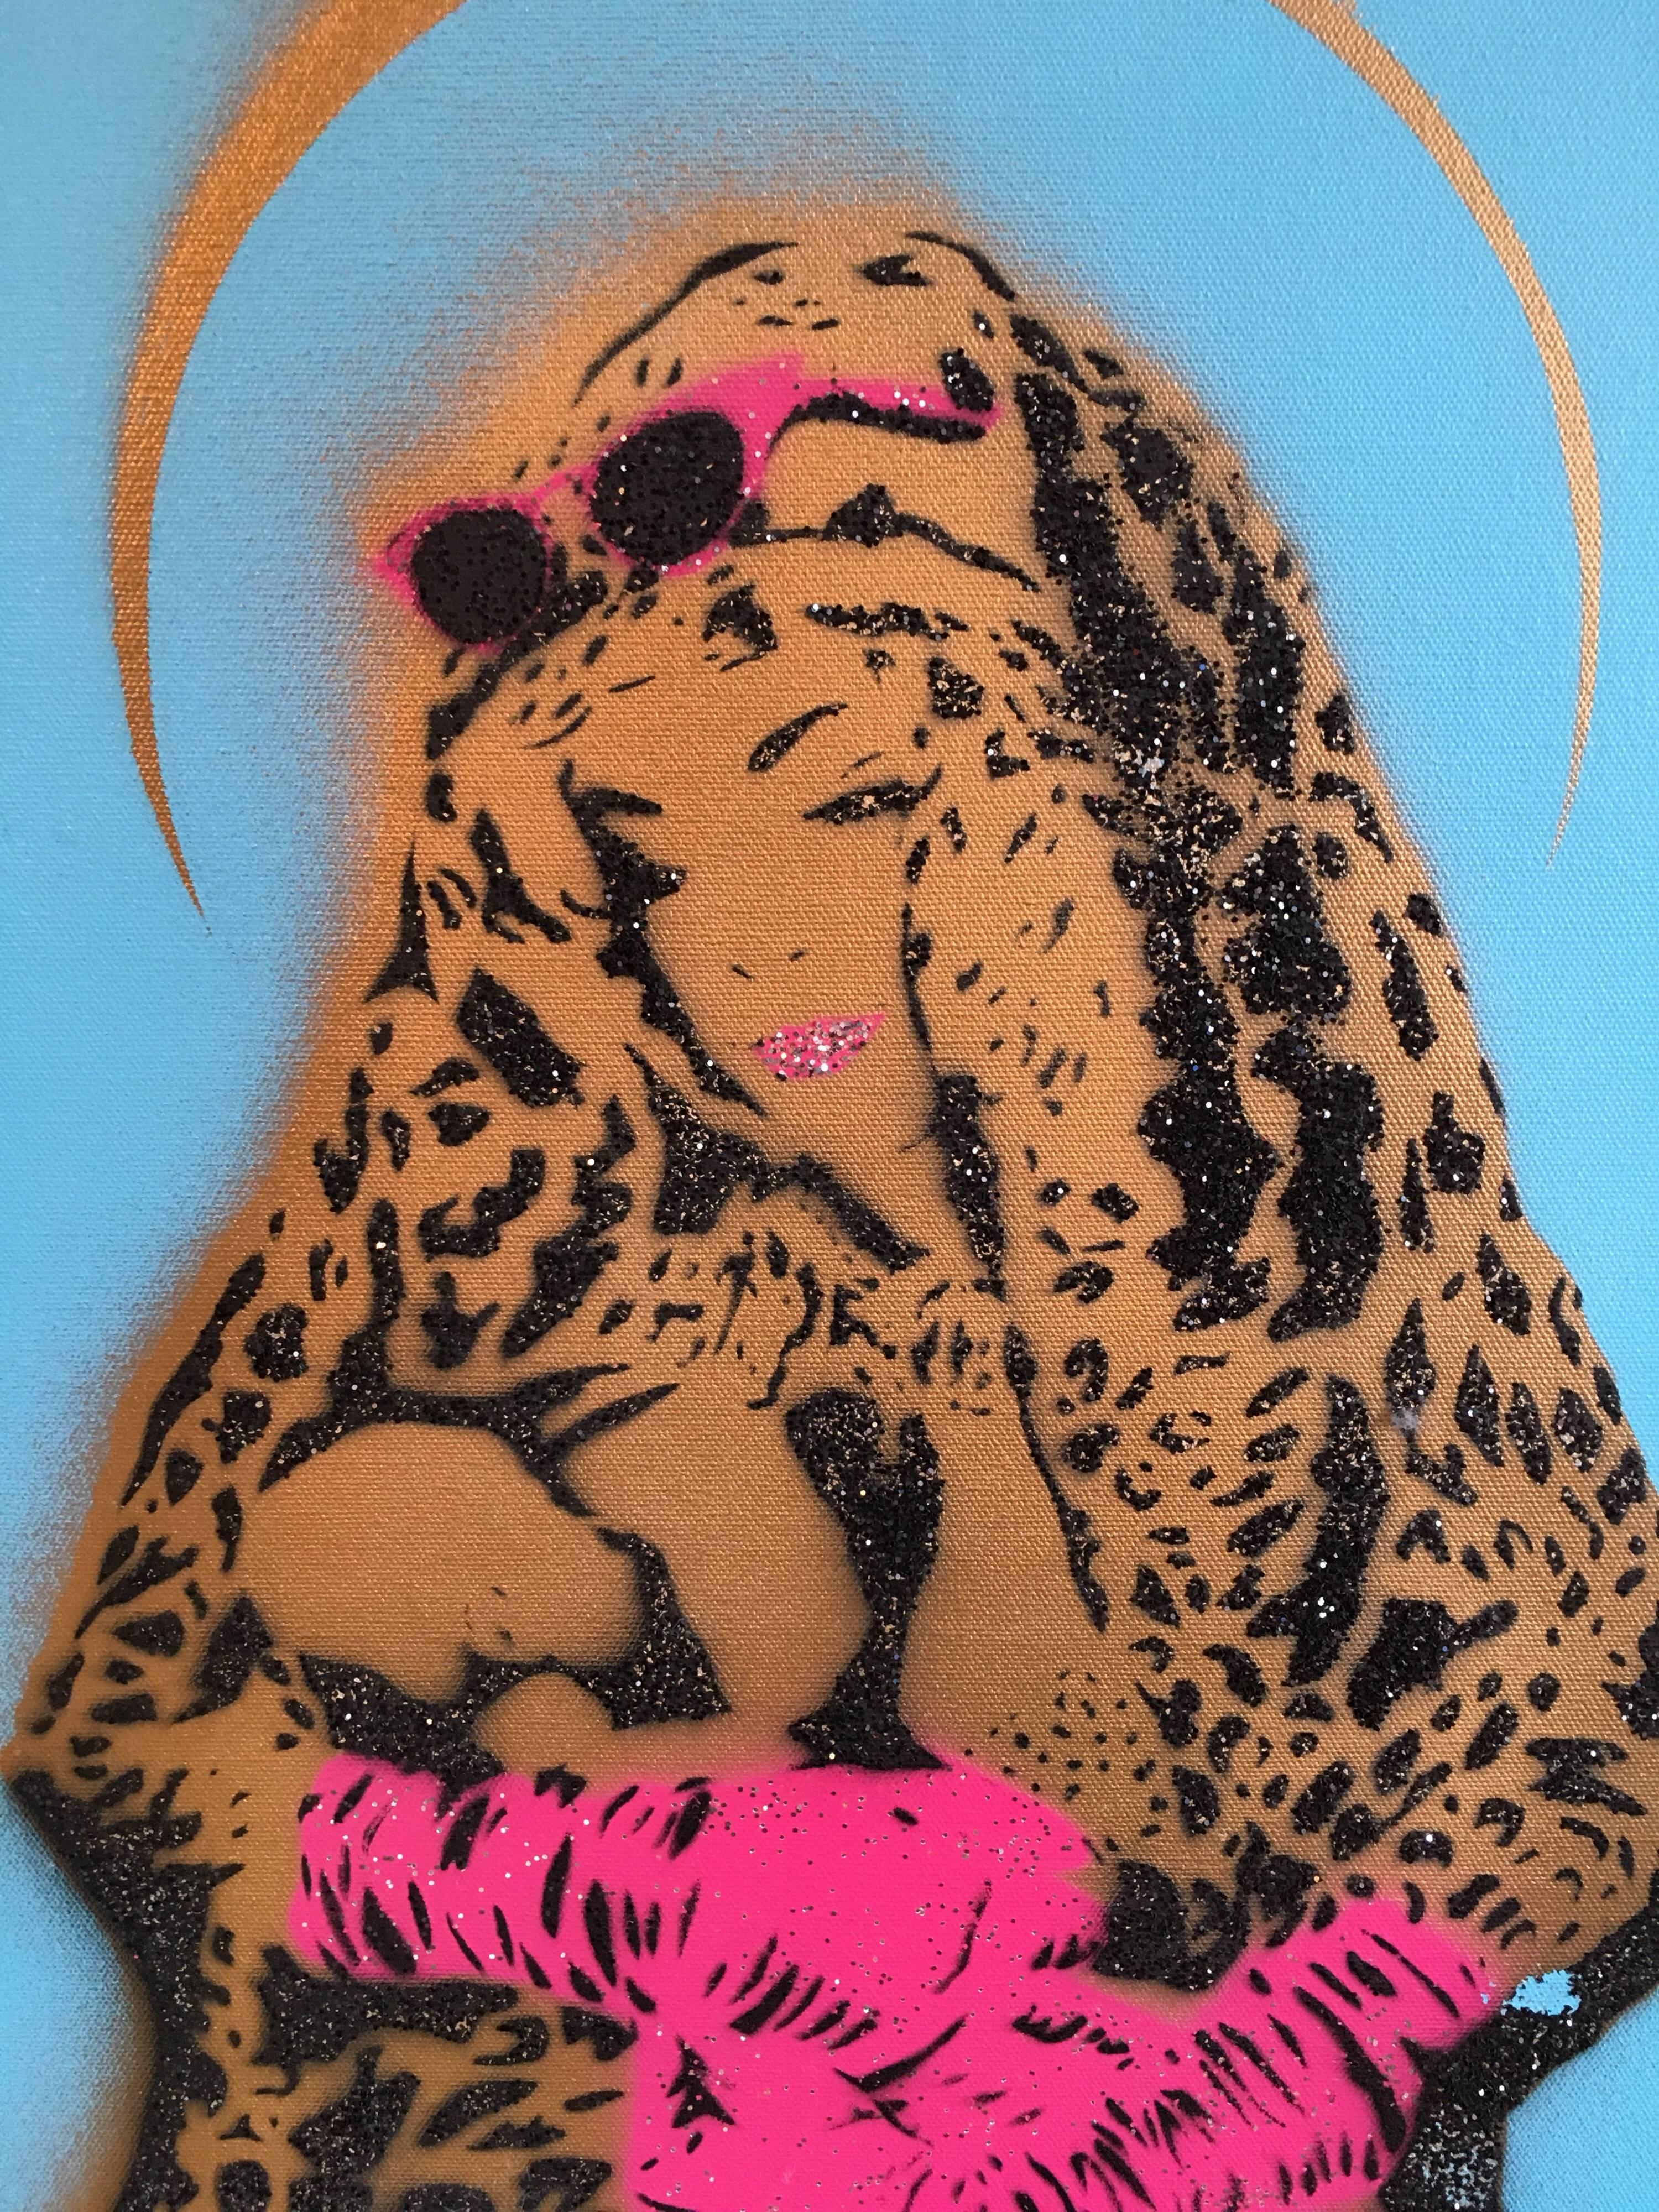 Leopard Print Mother & Child, Street Art - Impressionist Painting by Rose Popay aka The Art Tart